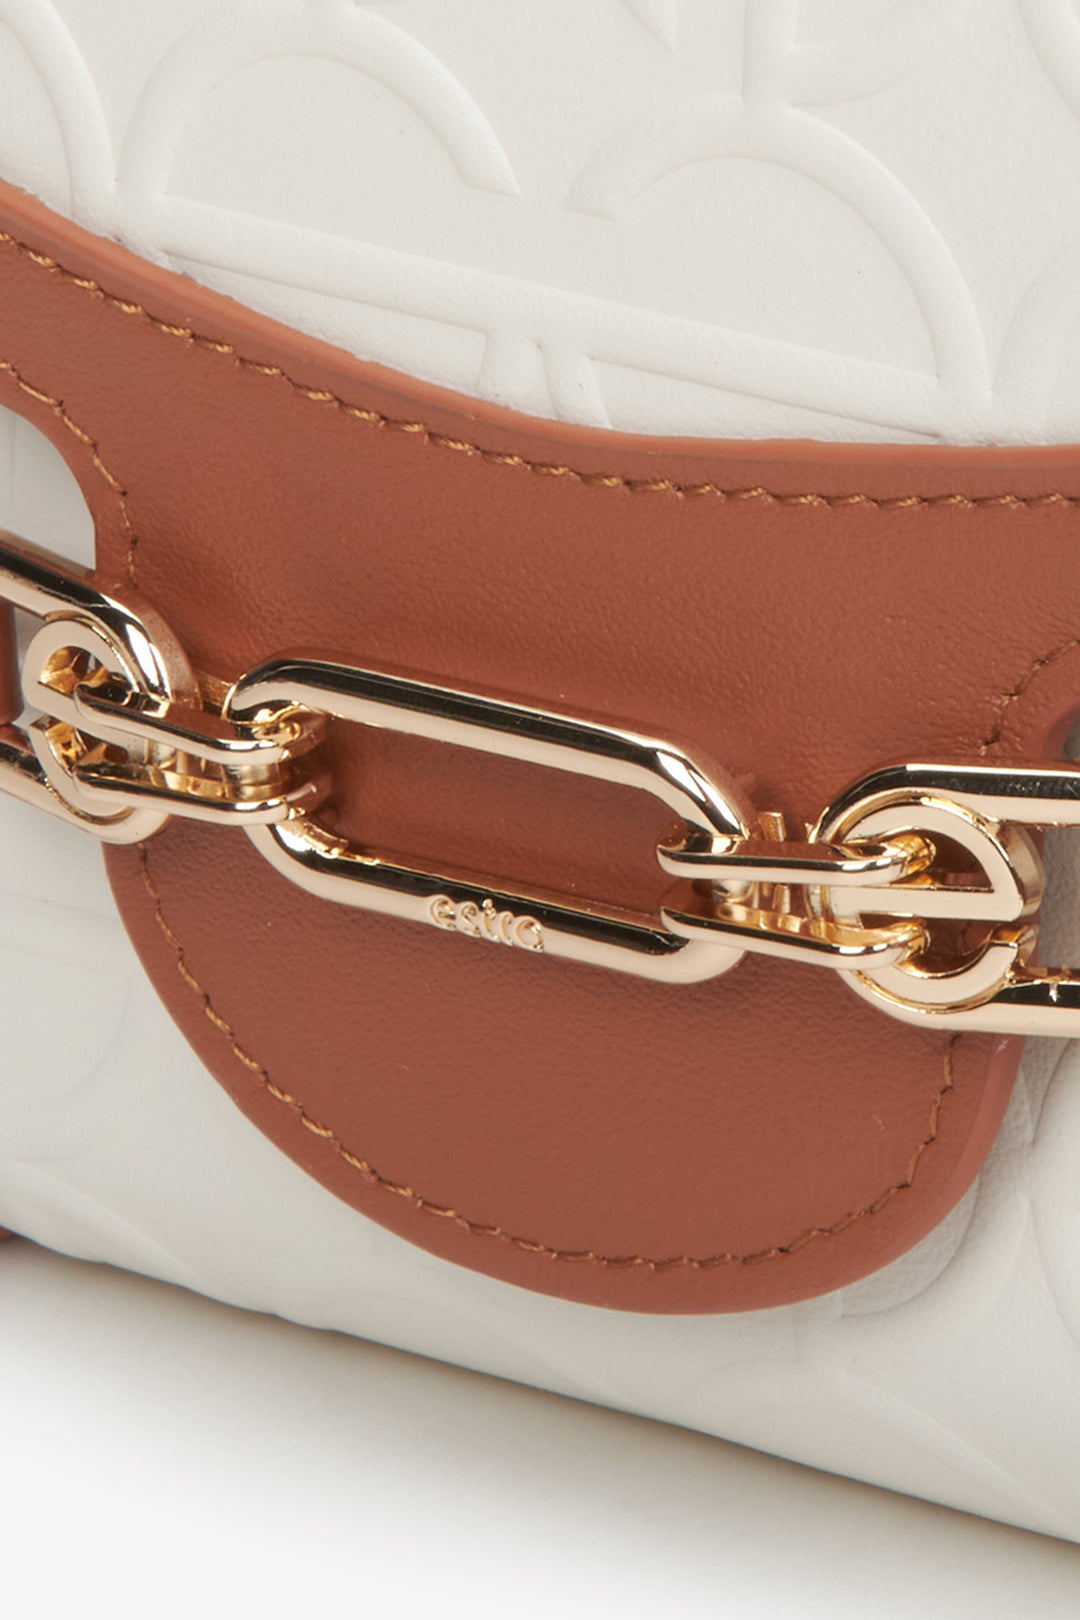 Beige-brown Estro women's compact wallet made of genuine leather - close-up on details.